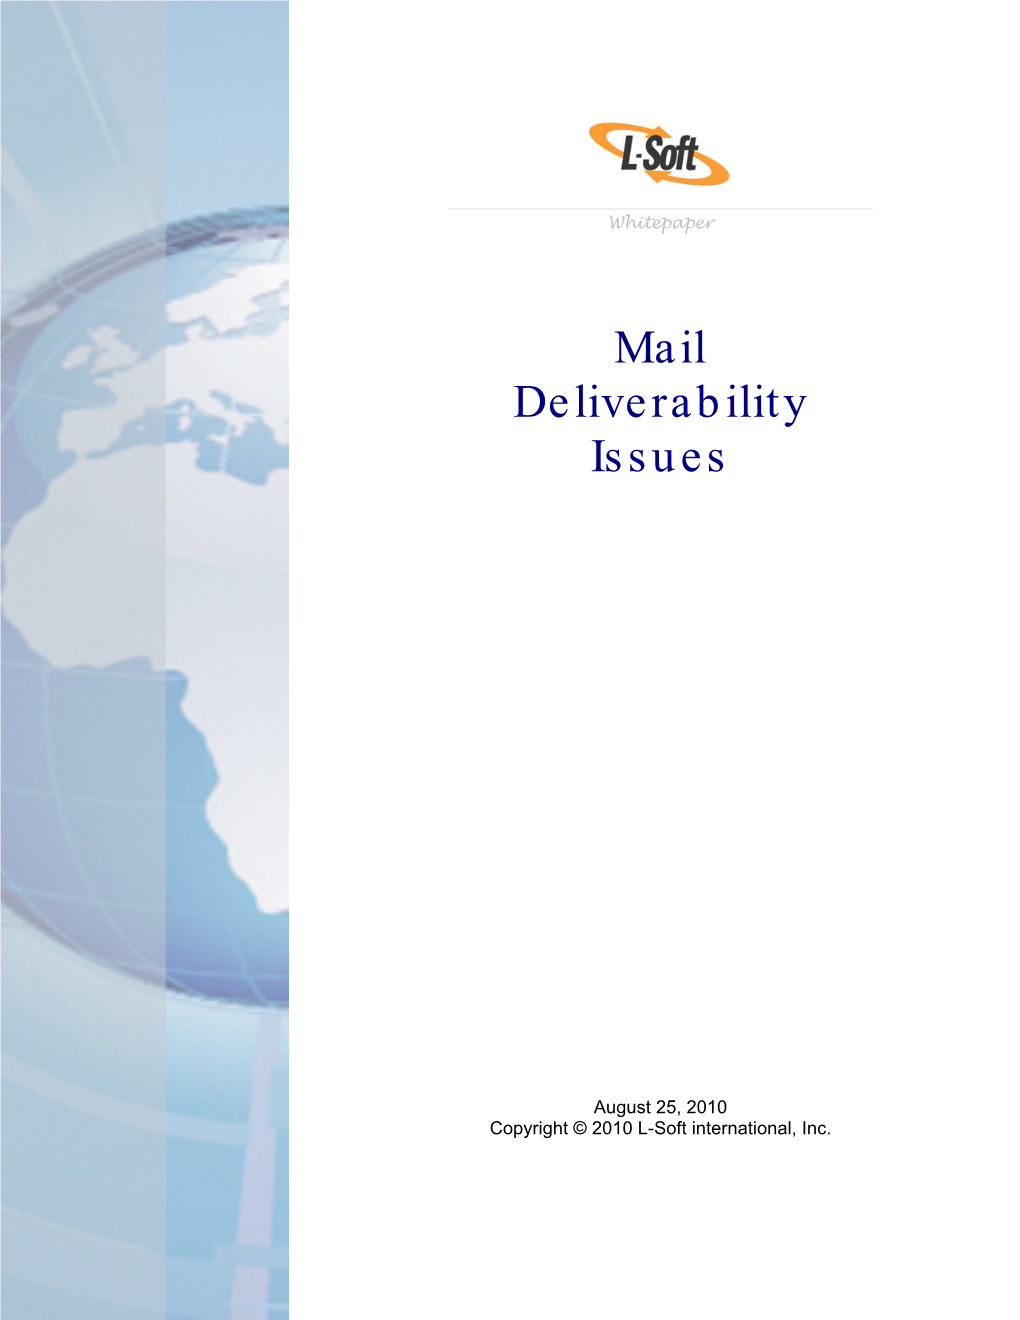 Mail Deliverability Issues